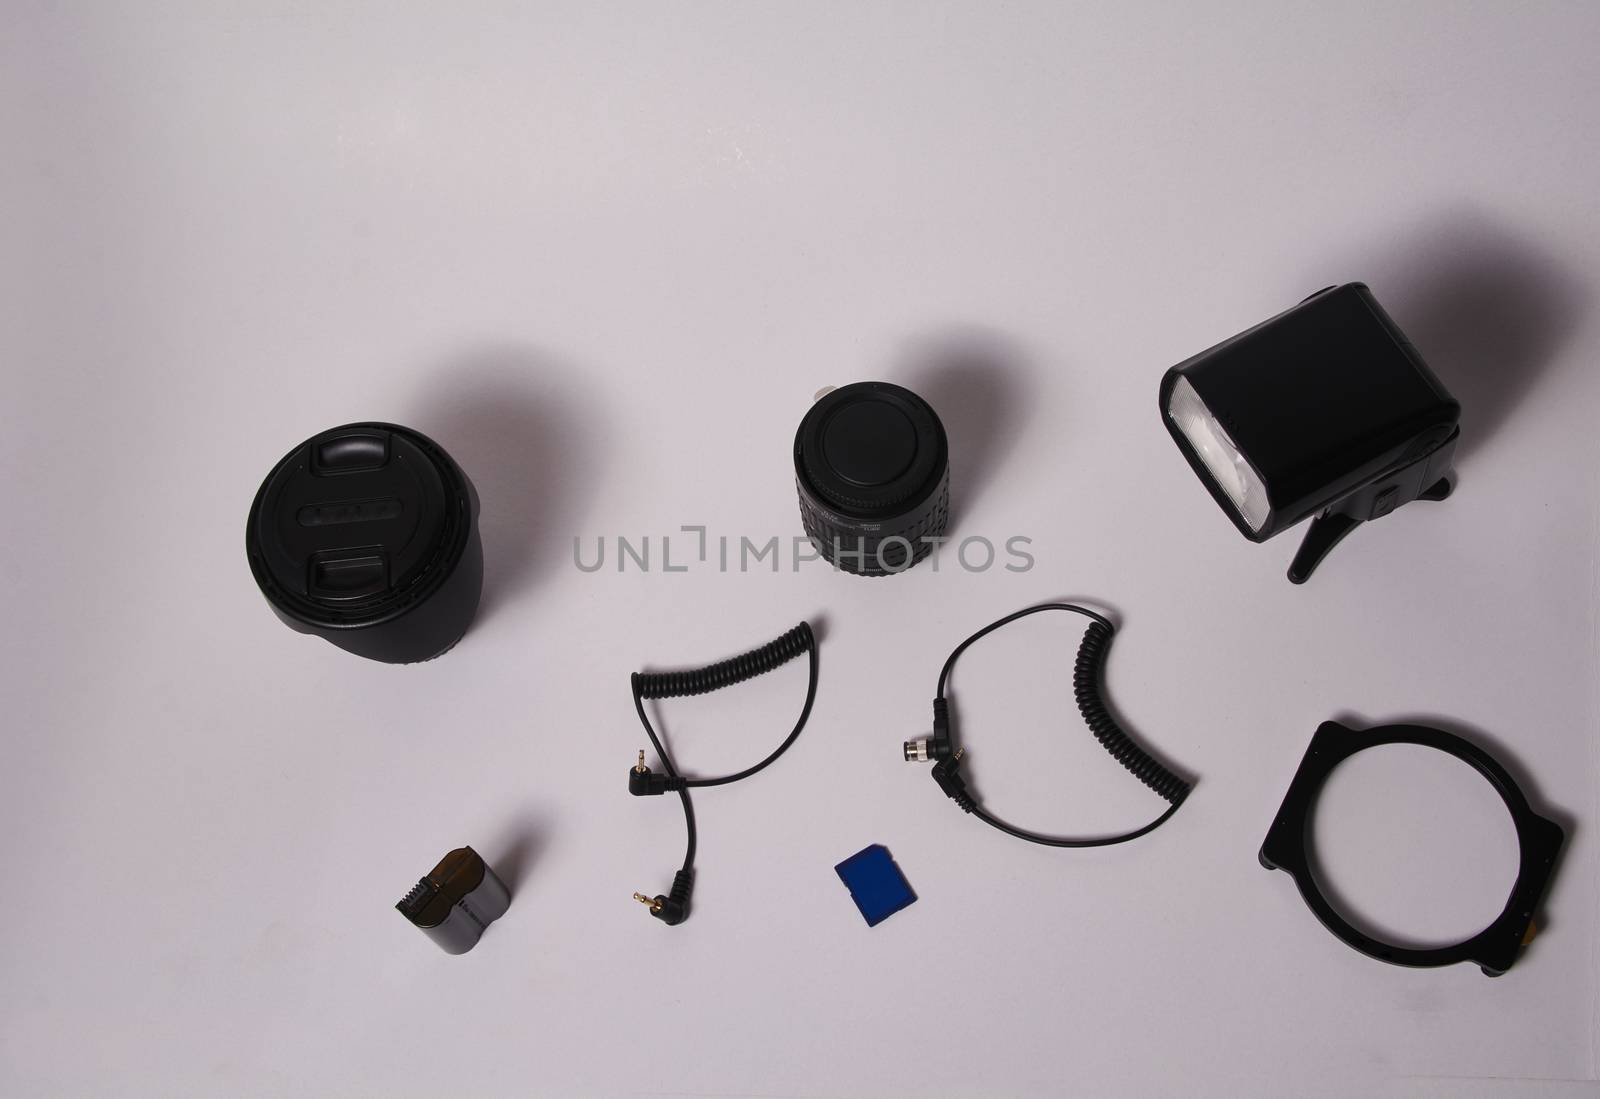 Set of photographic equipment, cables, battery, lens, flash, extender. Love of photographic